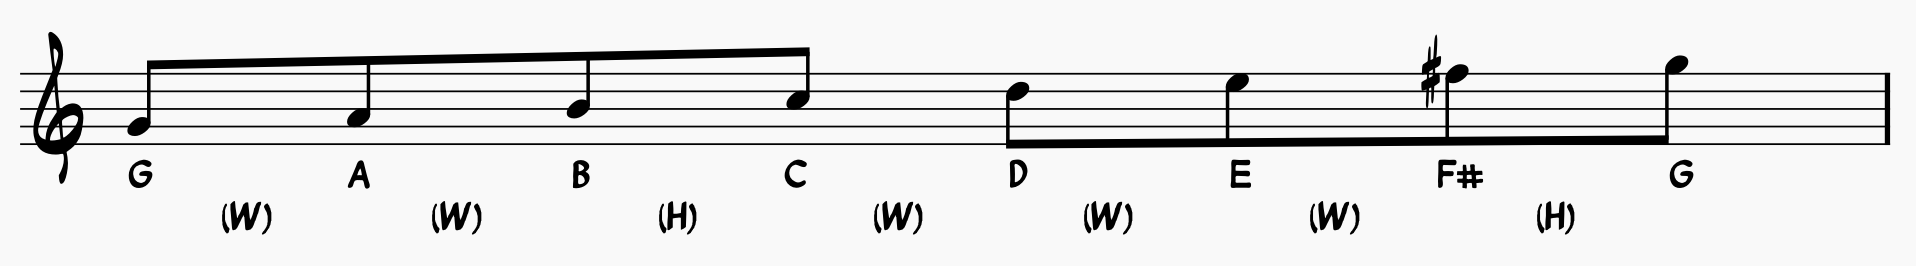 G Major scale notated with whole steps and half steps